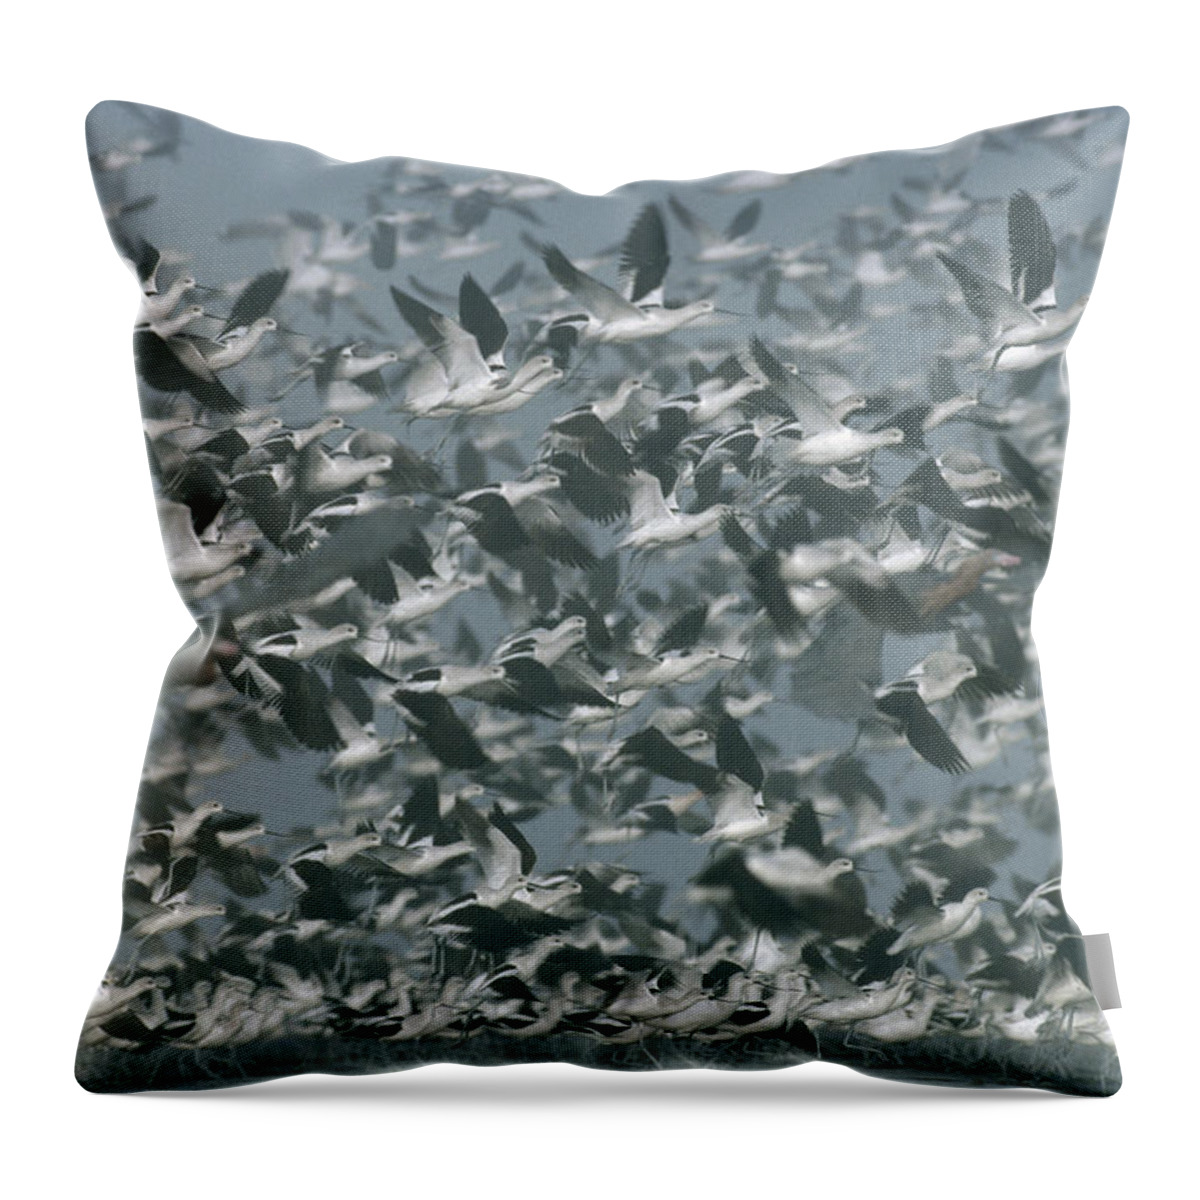 00171486 Throw Pillow featuring the photograph American Avocet Flock Erupting by Tim Fitzharris